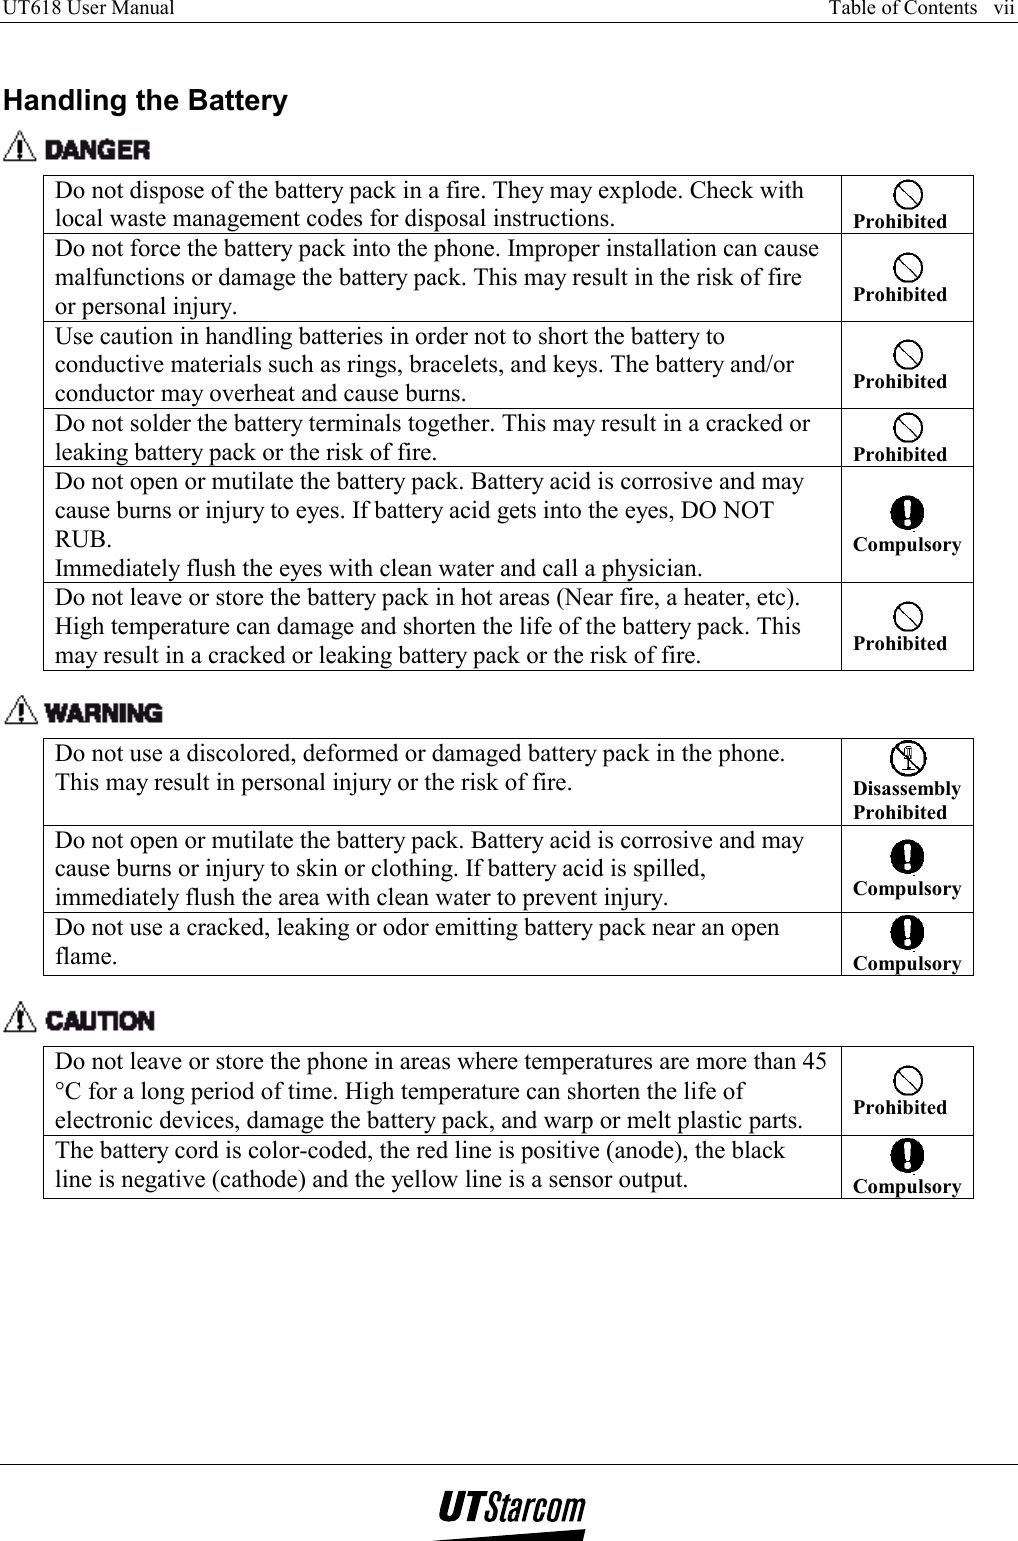 UT618 User Manual      Table of Contents   vii    Handling the Battery  Do not dispose of the battery pack in a fire. They may explode. Check with local waste management codes for disposal instructions.   Prohibited Do not force the battery pack into the phone. Improper installation can cause malfunctions or damage the battery pack. This may result in the risk of fire or personal injury.  Prohibited Use caution in handling batteries in order not to short the battery to conductive materials such as rings, bracelets, and keys. The battery and/or conductor may overheat and cause burns.  Prohibited Do not solder the battery terminals together. This may result in a cracked or leaking battery pack or the risk of fire.   Prohibited Do not open or mutilate the battery pack. Battery acid is corrosive and may cause burns or injury to eyes. If battery acid gets into the eyes, DO NOT RUB. Immediately flush the eyes with clean water and call a physician.  Compulsory Do not leave or store the battery pack in hot areas (Near fire, a heater, etc). High temperature can damage and shorten the life of the battery pack. This may result in a cracked or leaking battery pack or the risk of fire.  Prohibited   Do not use a discolored, deformed or damaged battery pack in the phone. This may result in personal injury or the risk of fire.   Disassembly Prohibited Do not open or mutilate the battery pack. Battery acid is corrosive and may cause burns or injury to skin or clothing. If battery acid is spilled, immediately flush the area with clean water to prevent injury.  Compulsory Do not use a cracked, leaking or odor emitting battery pack near an open flame.    Compulsory   Do not leave or store the phone in areas where temperatures are more than 45 °C for a long period of time. High temperature can shorten the life of electronic devices, damage the battery pack, and warp or melt plastic parts.  Prohibited The battery cord is color-coded, the red line is positive (anode), the black line is negative (cathode) and the yellow line is a sensor output.   Compulsory  